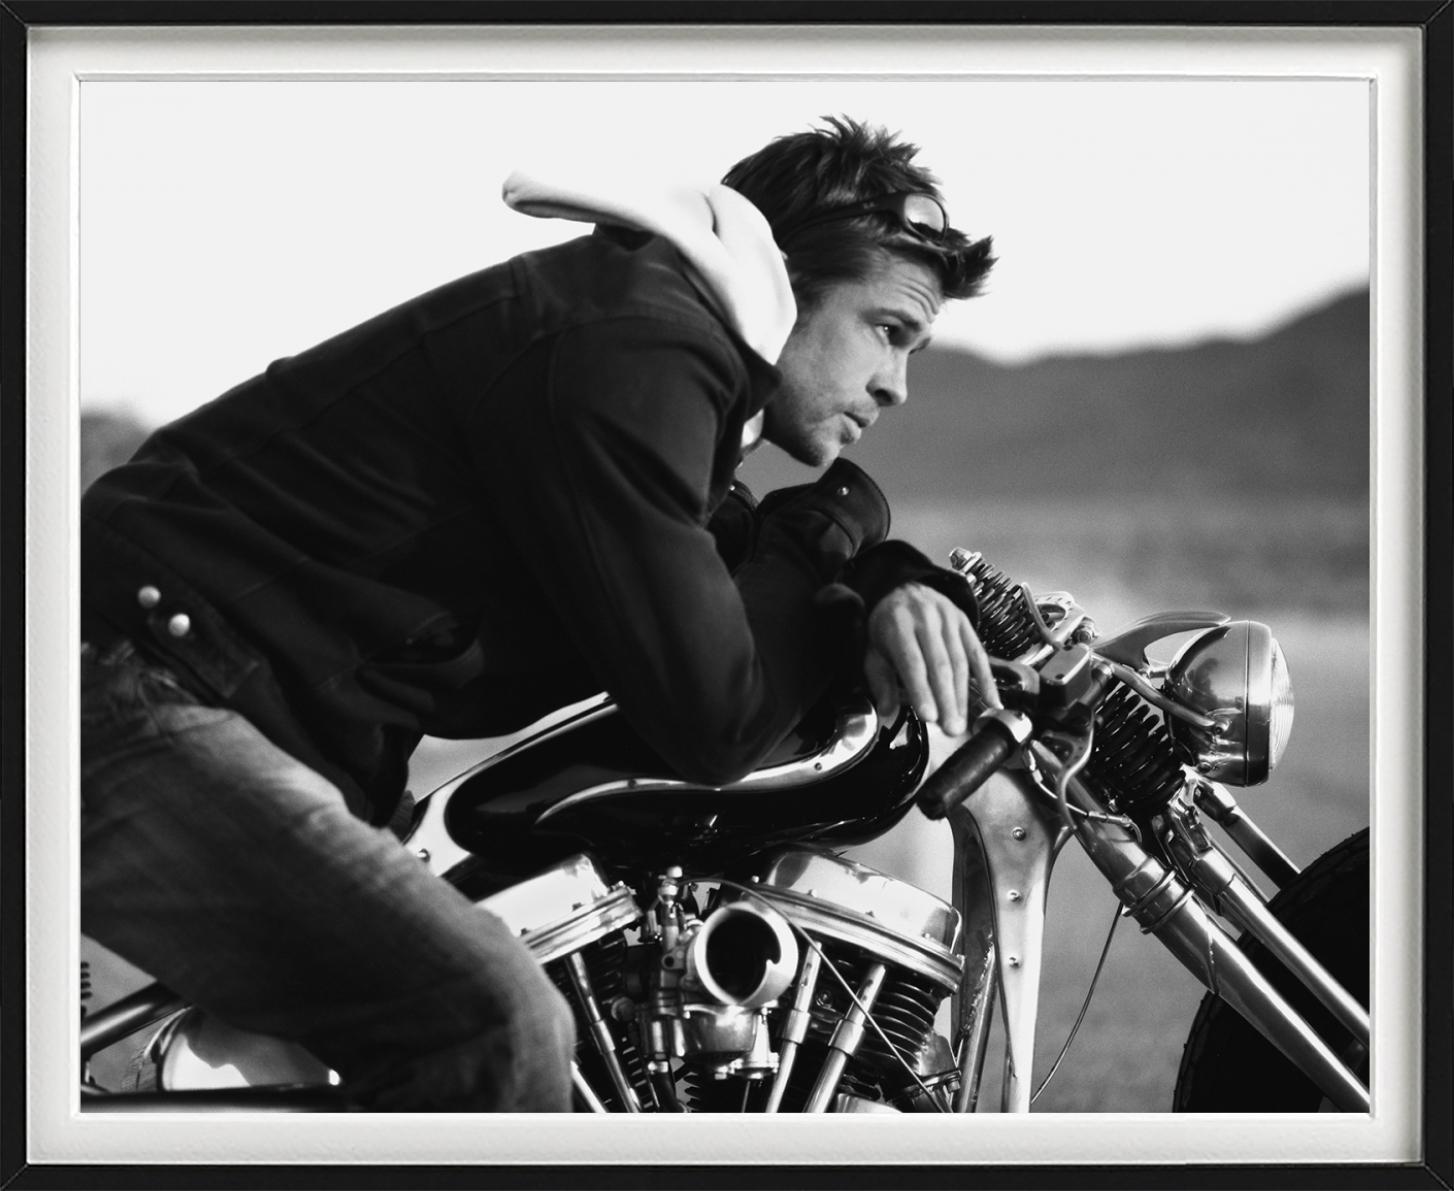 Brad Pitt - b&w portrait of the actor on a motorcycle, fine art photography 2005 - Gray Black and White Photograph by Timothy White